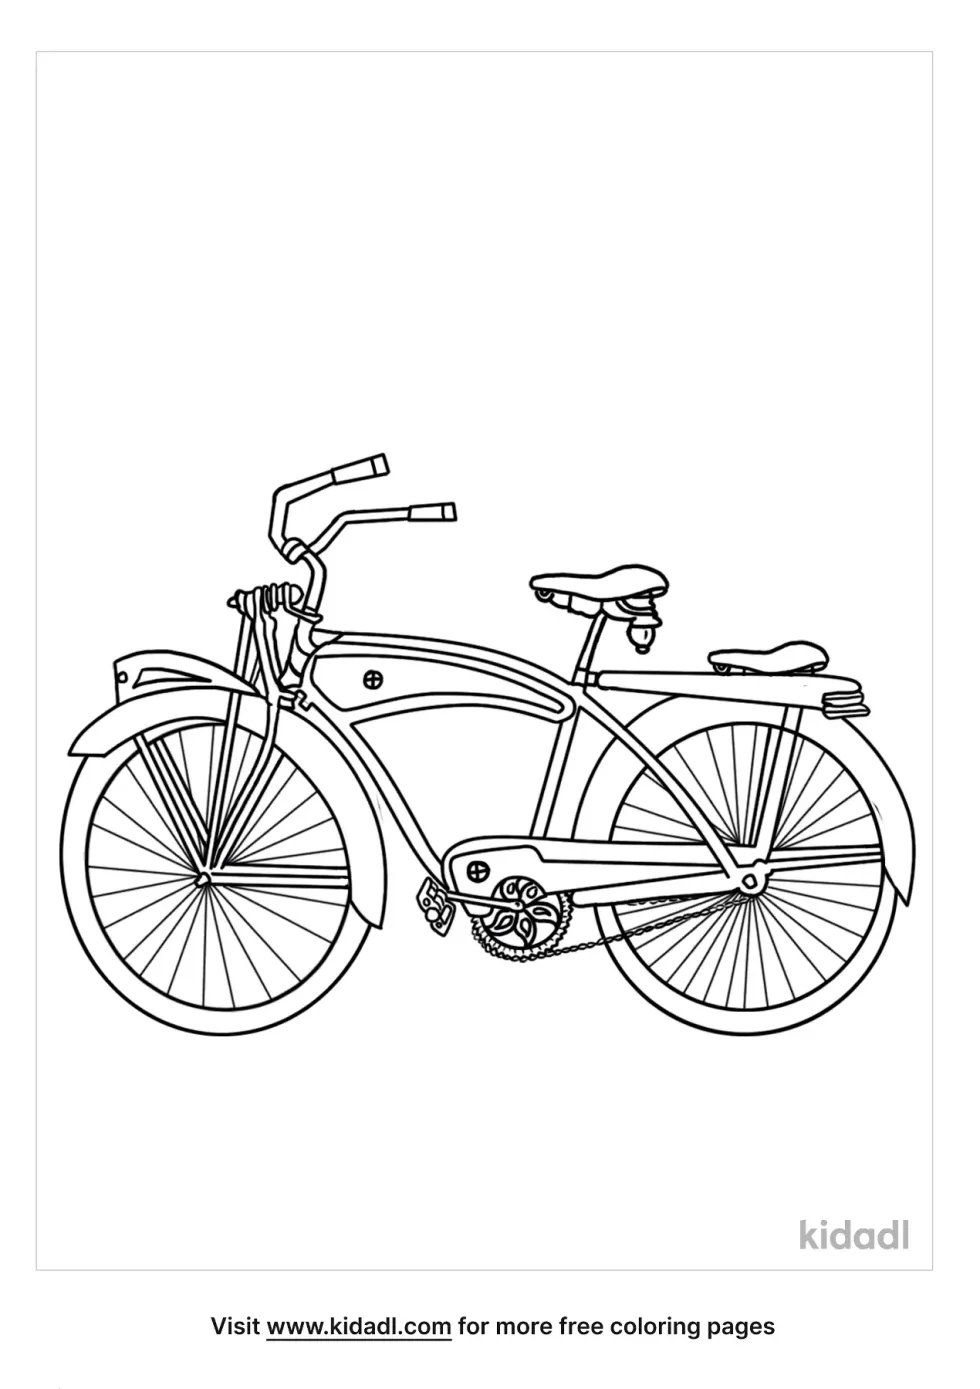 Old Motorized Bicycle Coloring Page